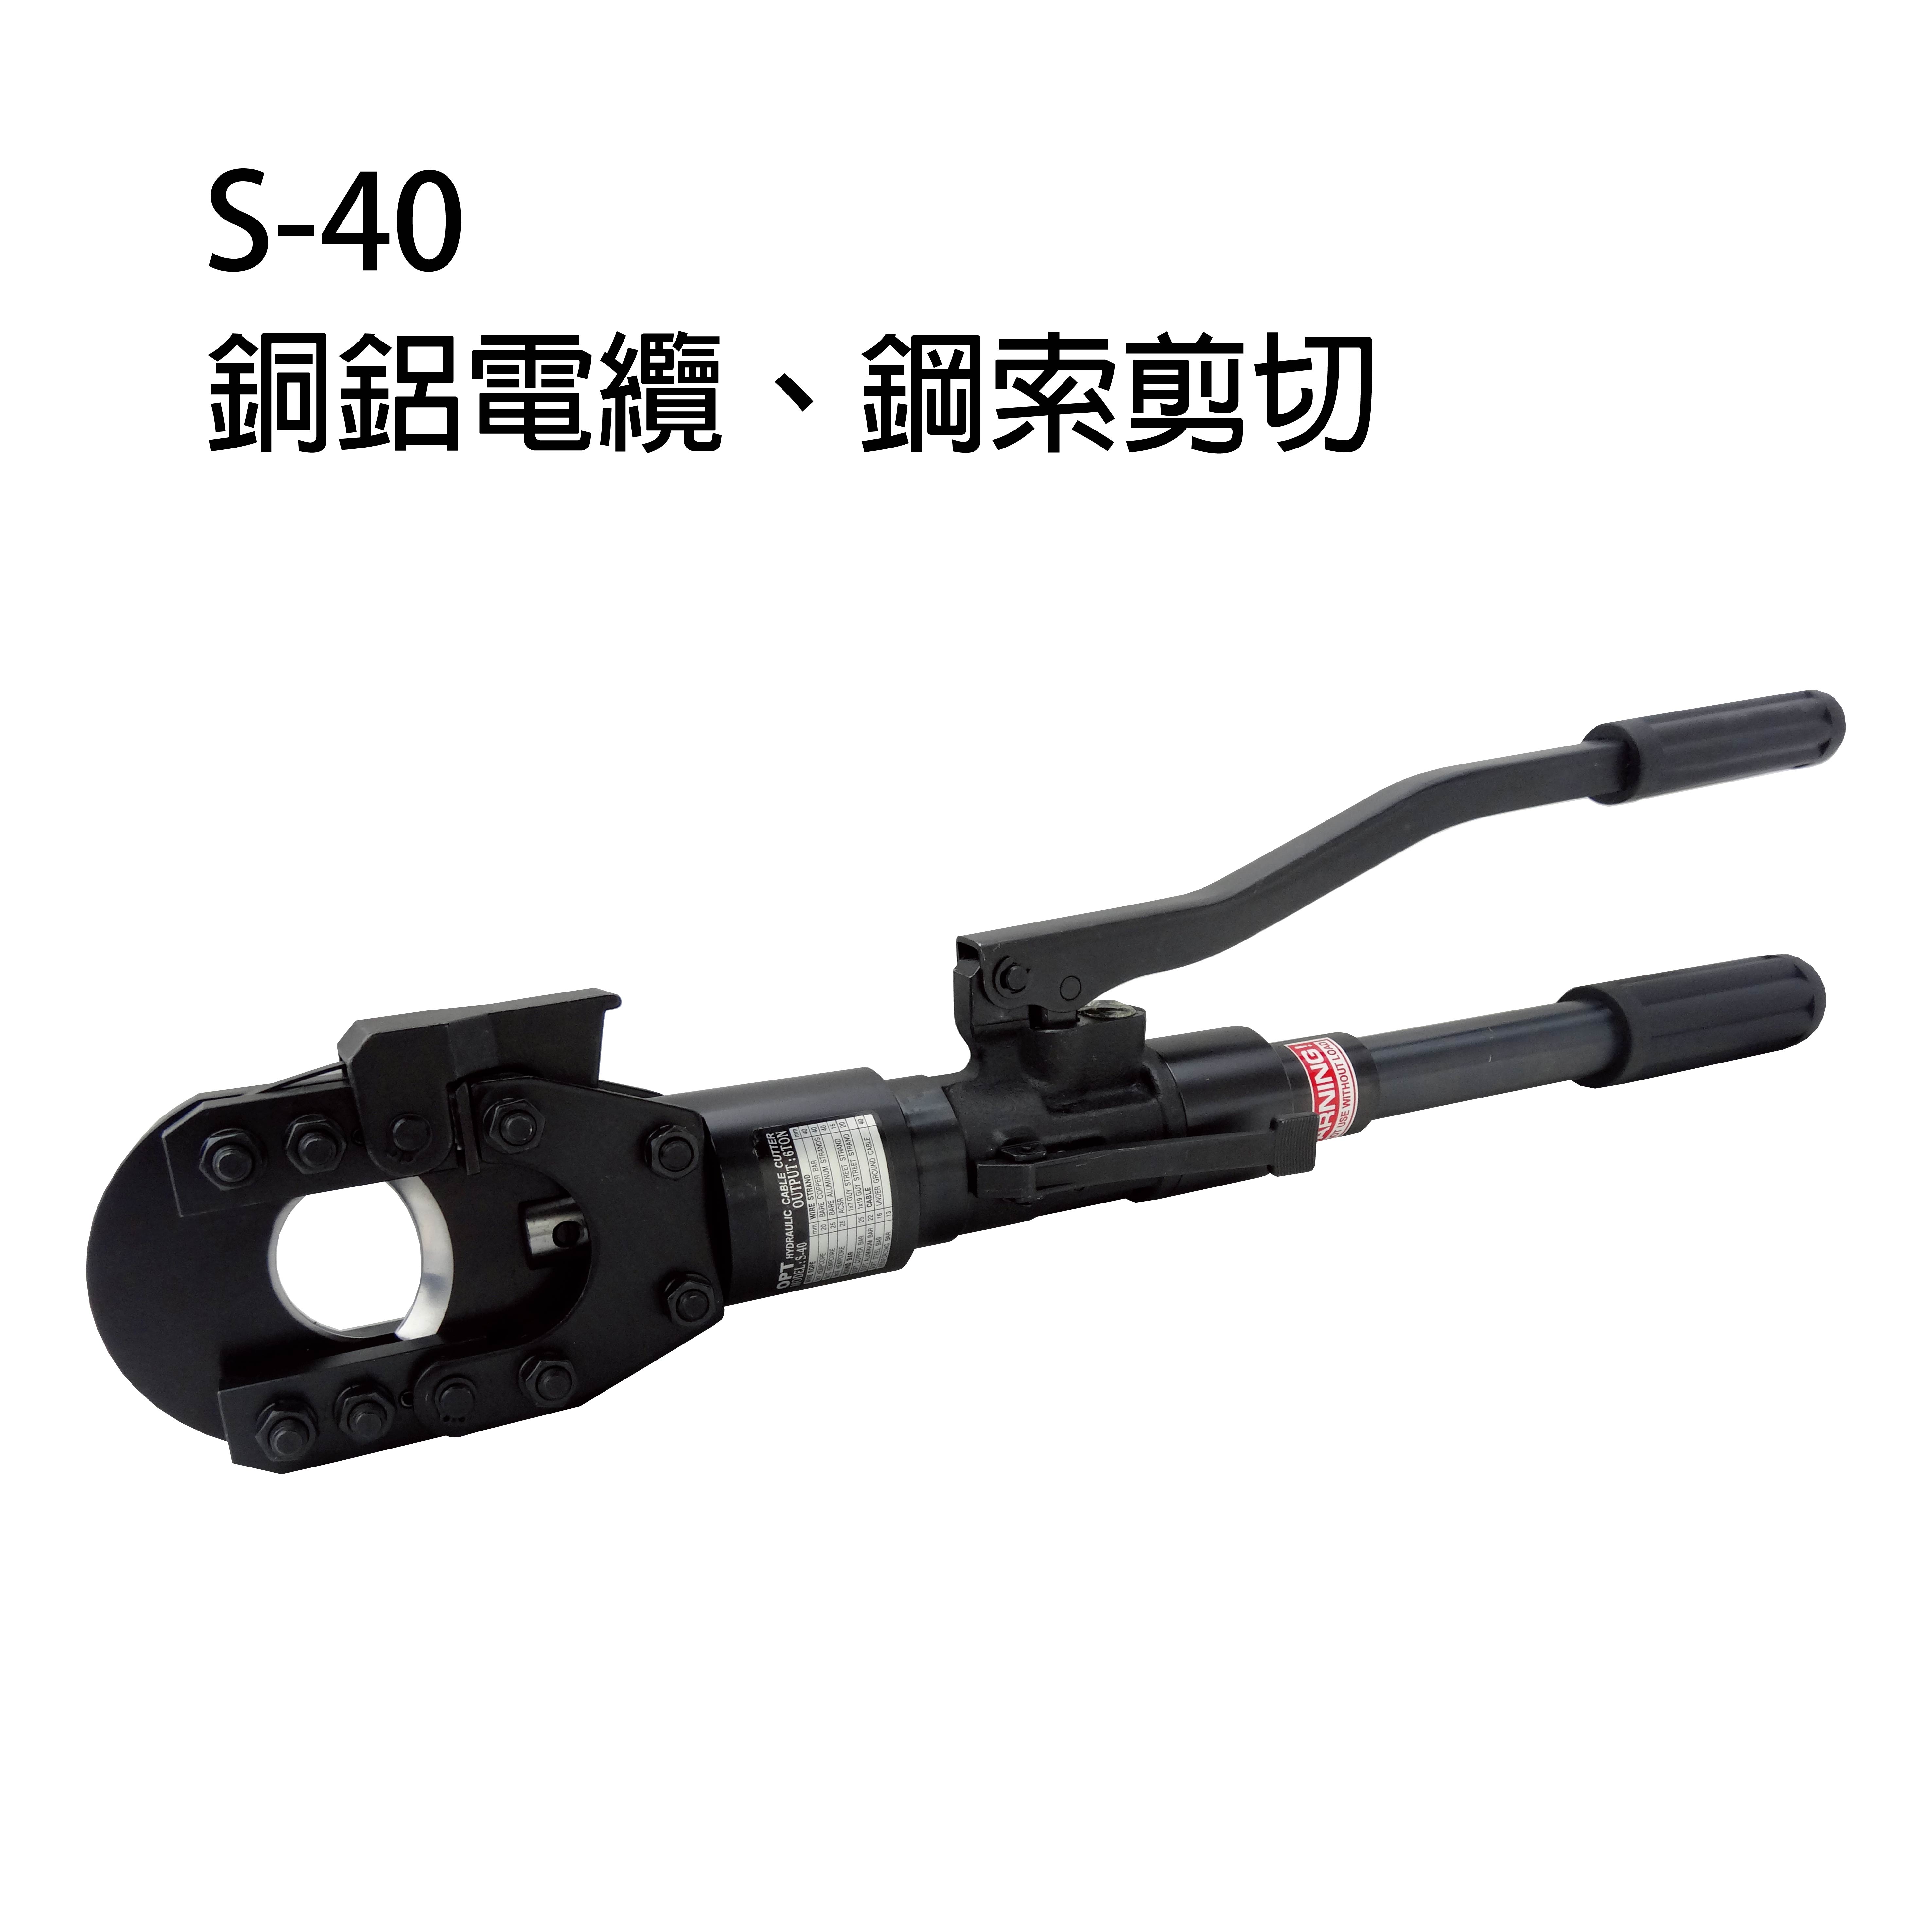 S-40 MANUAL HYDRAULIC CABLE CUTTERS-S-40